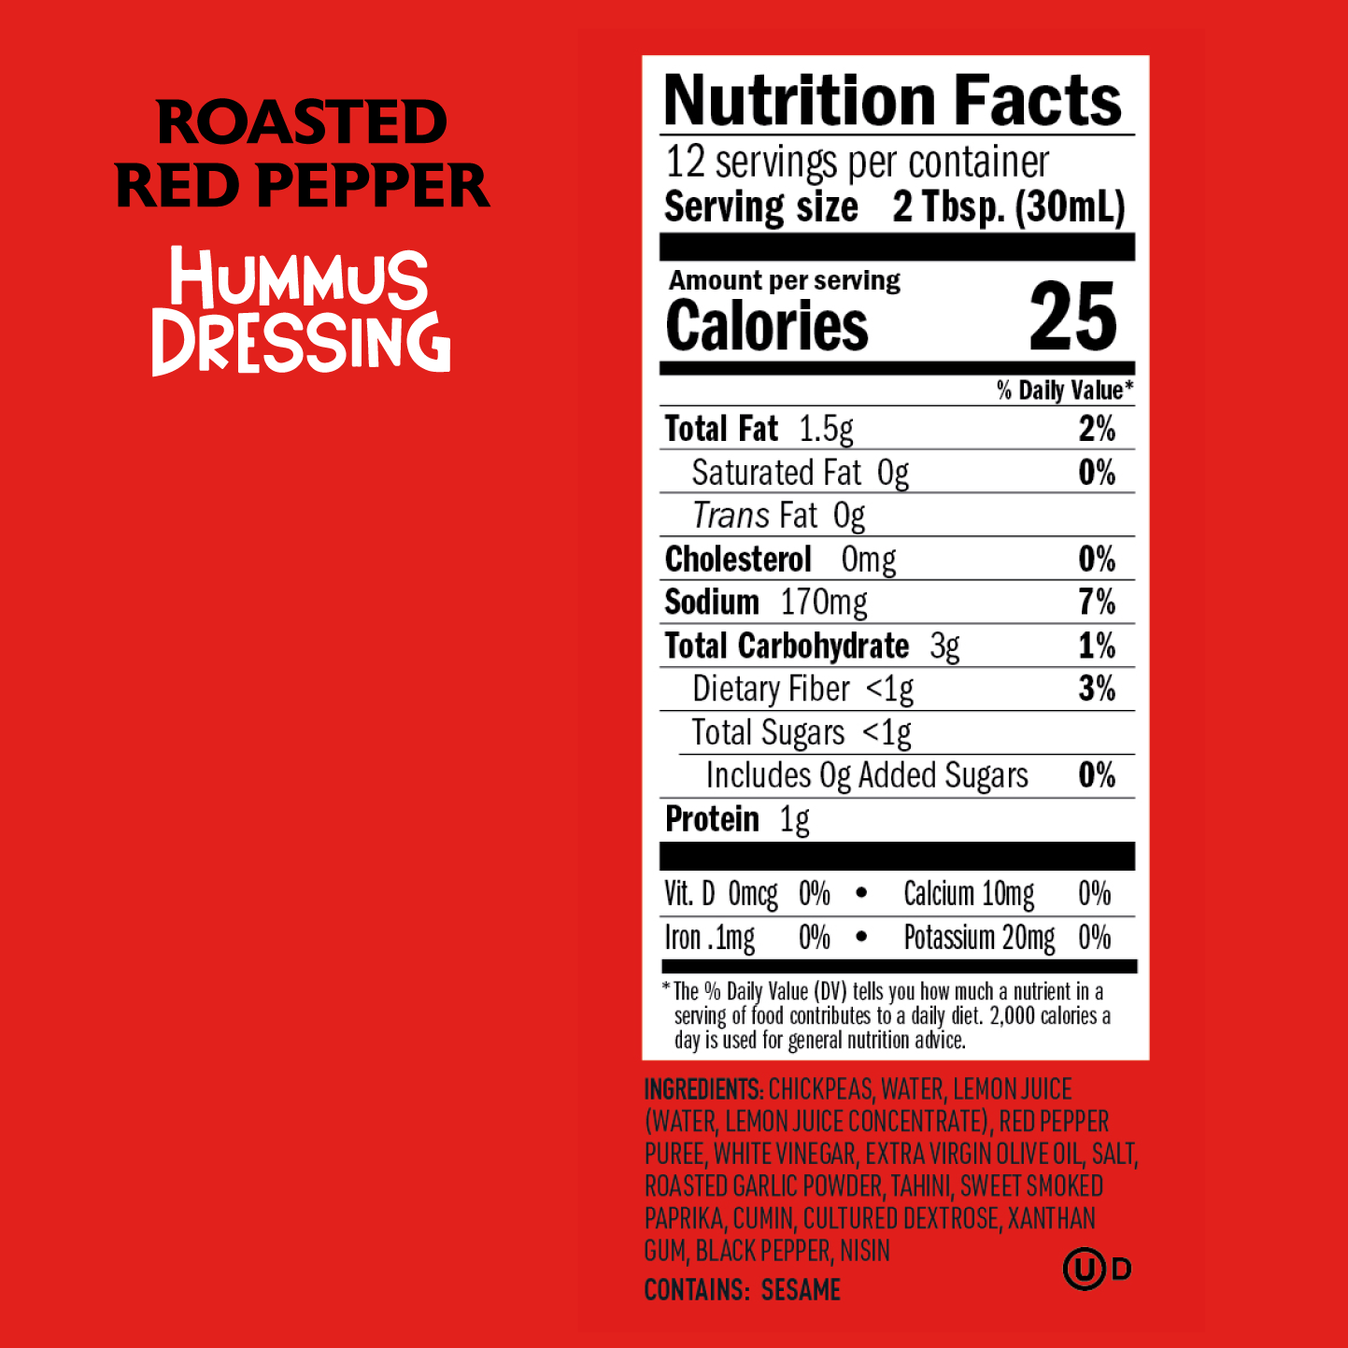 Nutrition facts for plant-based chickpea condiment. Low-calorie, clean-label, and vegan. 